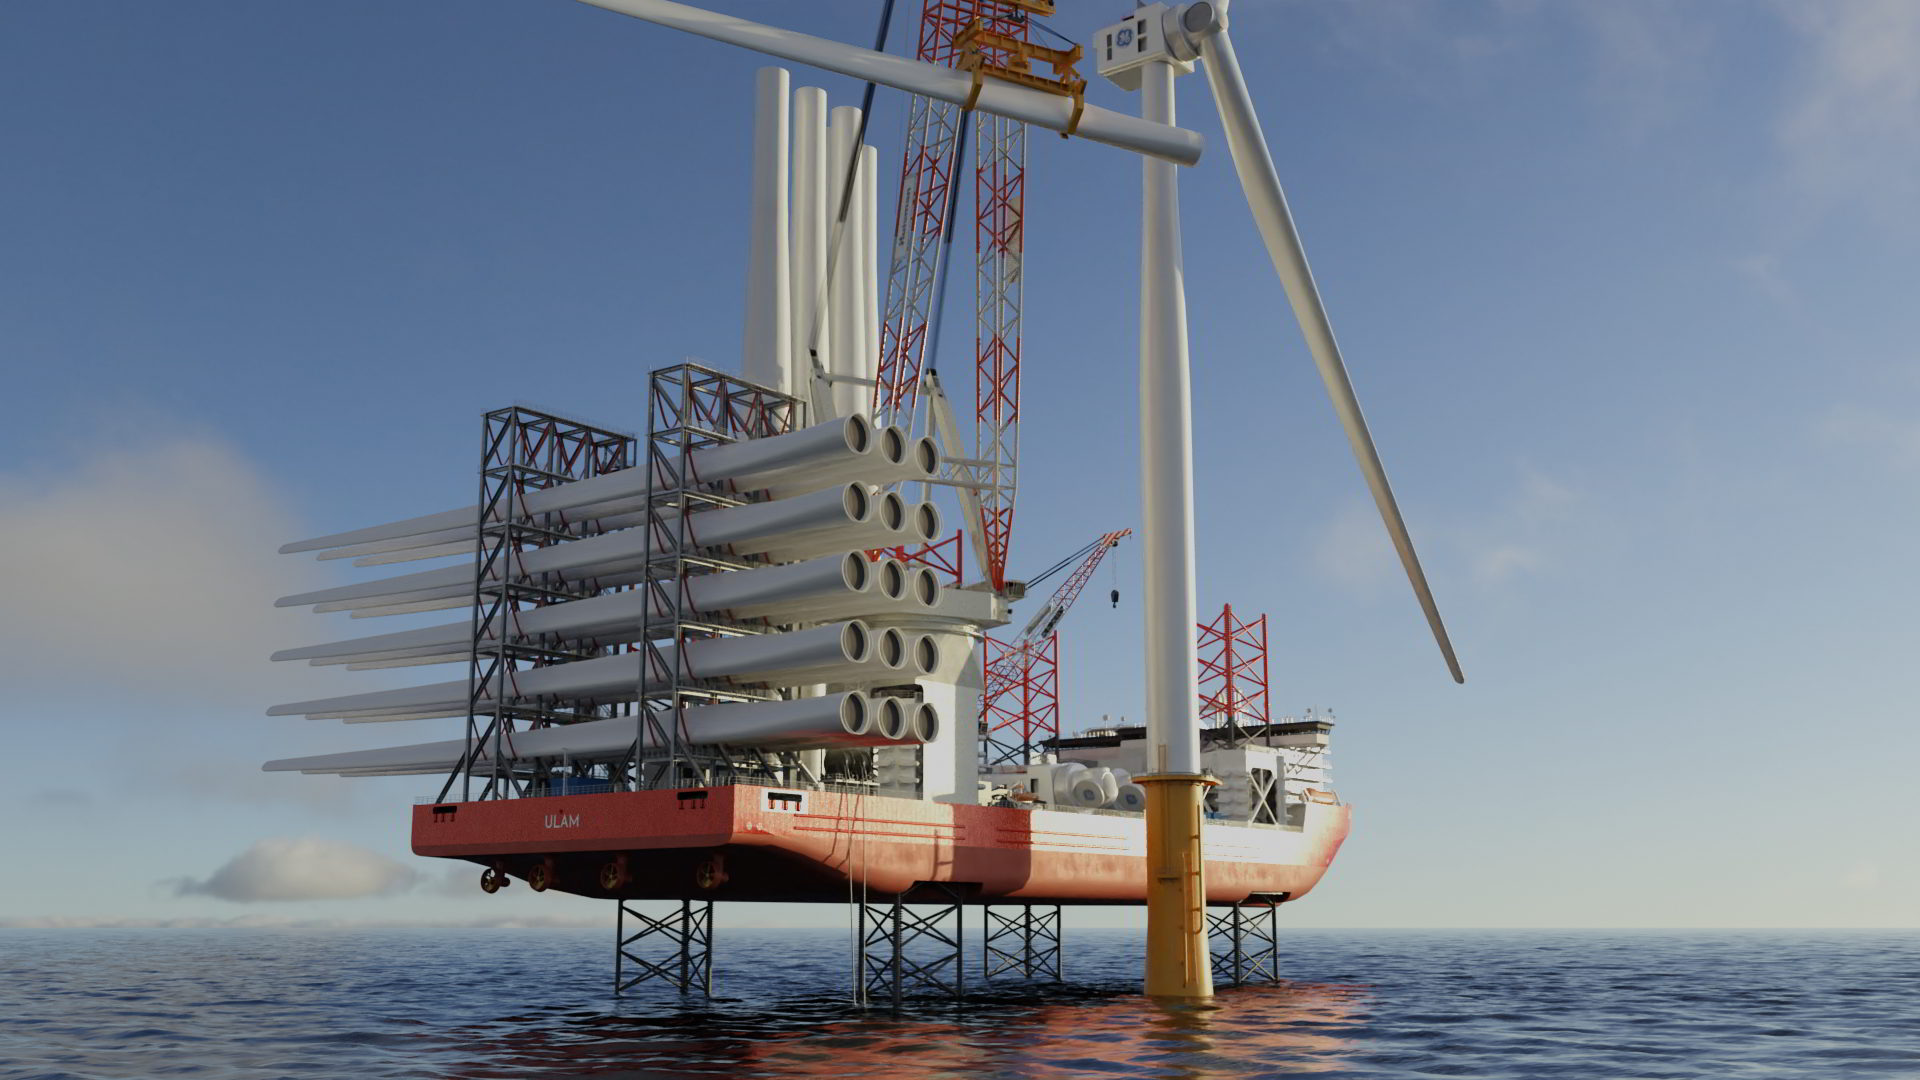 An image rendering NED-Project's wind turbine installation vessel